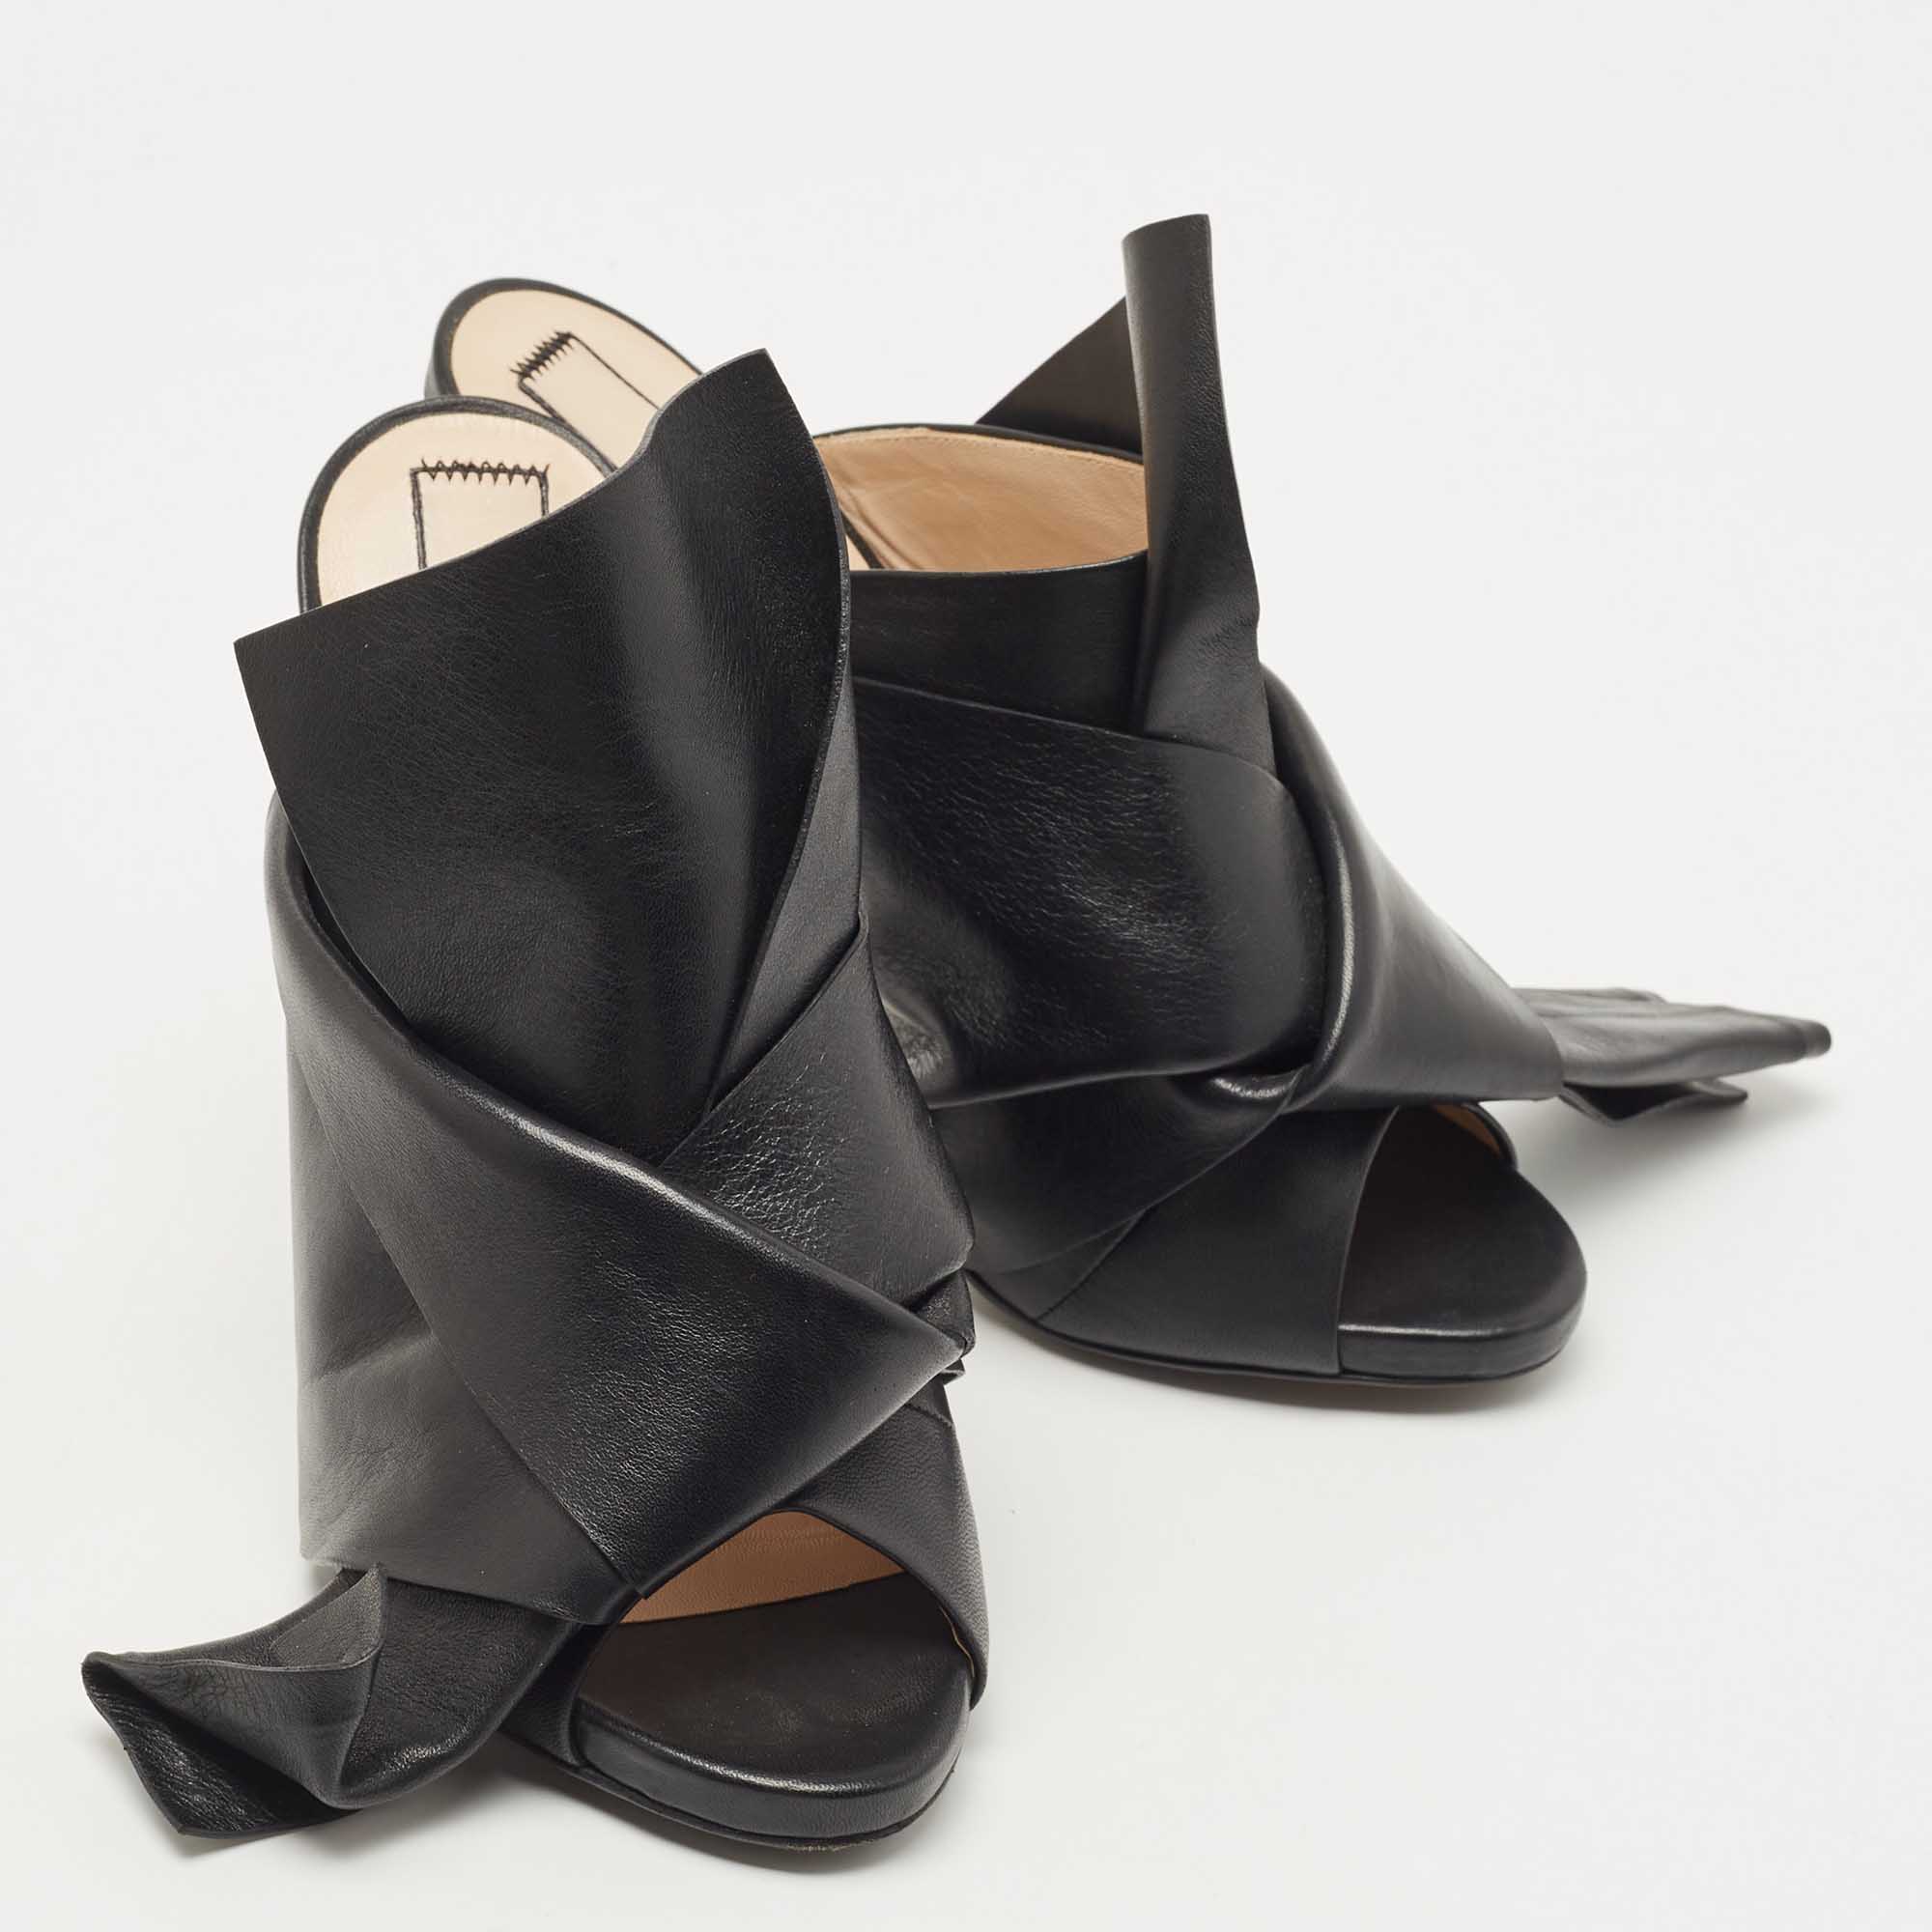 N21 Black Leather Raso Knot Mules Size 38